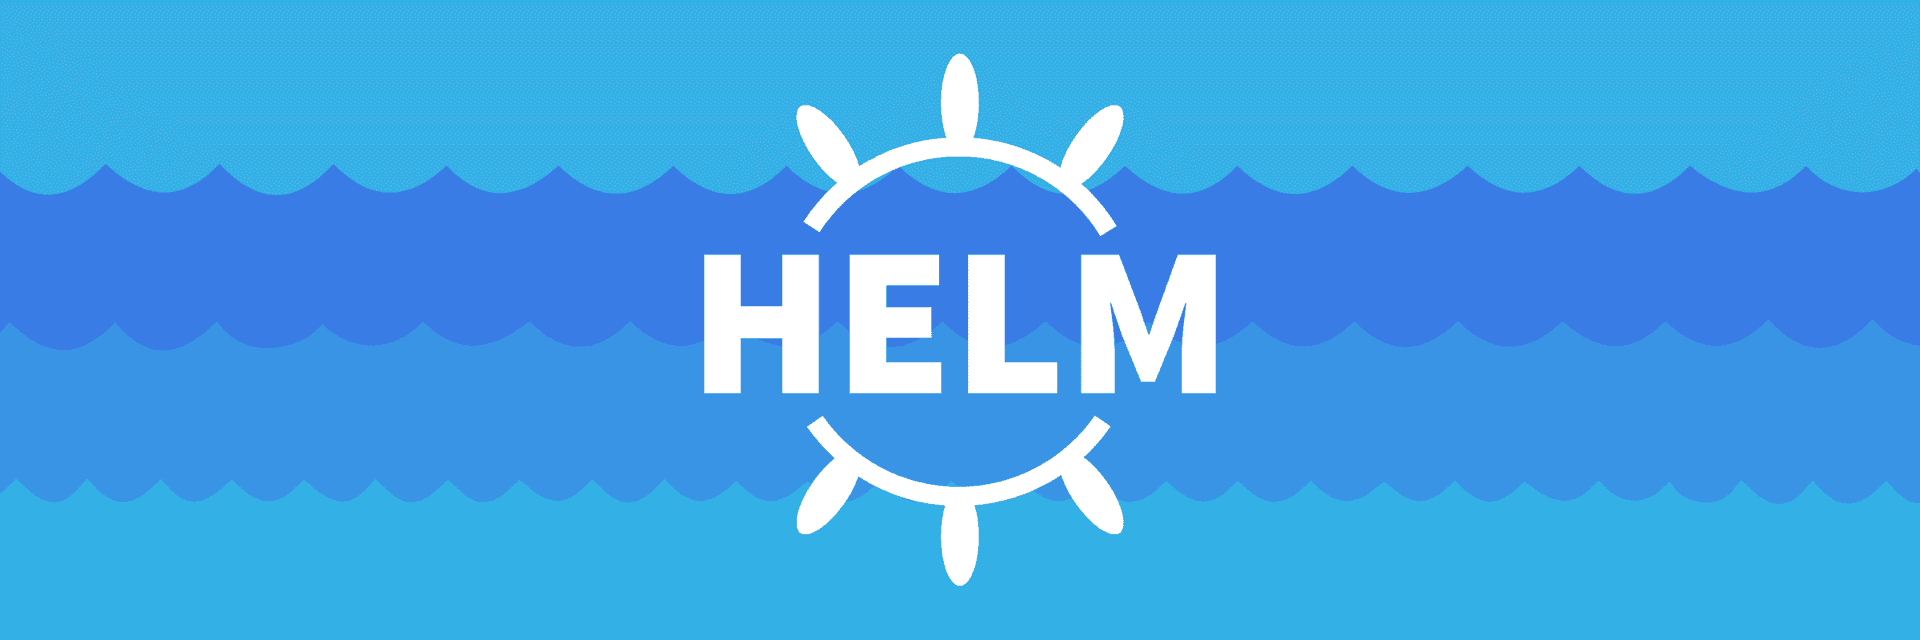 New action: Helm